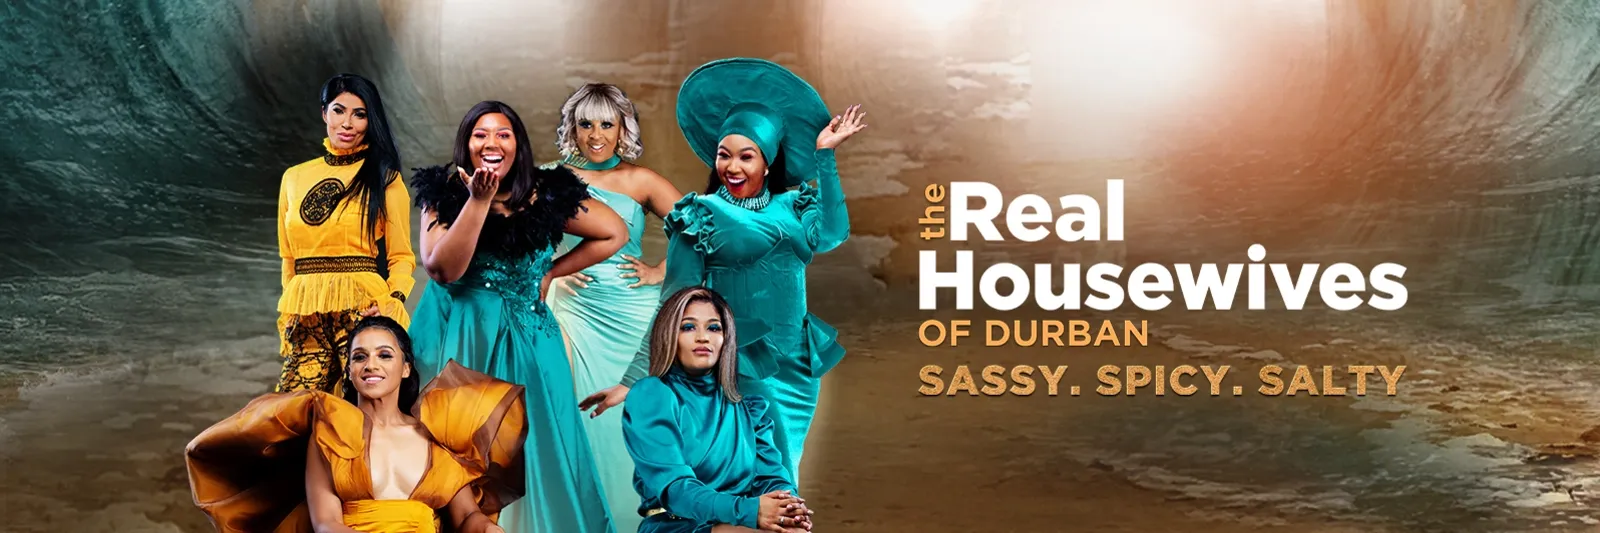 The Real Housewives Of Durban S04 (Episode 10 - 12 Added) 5